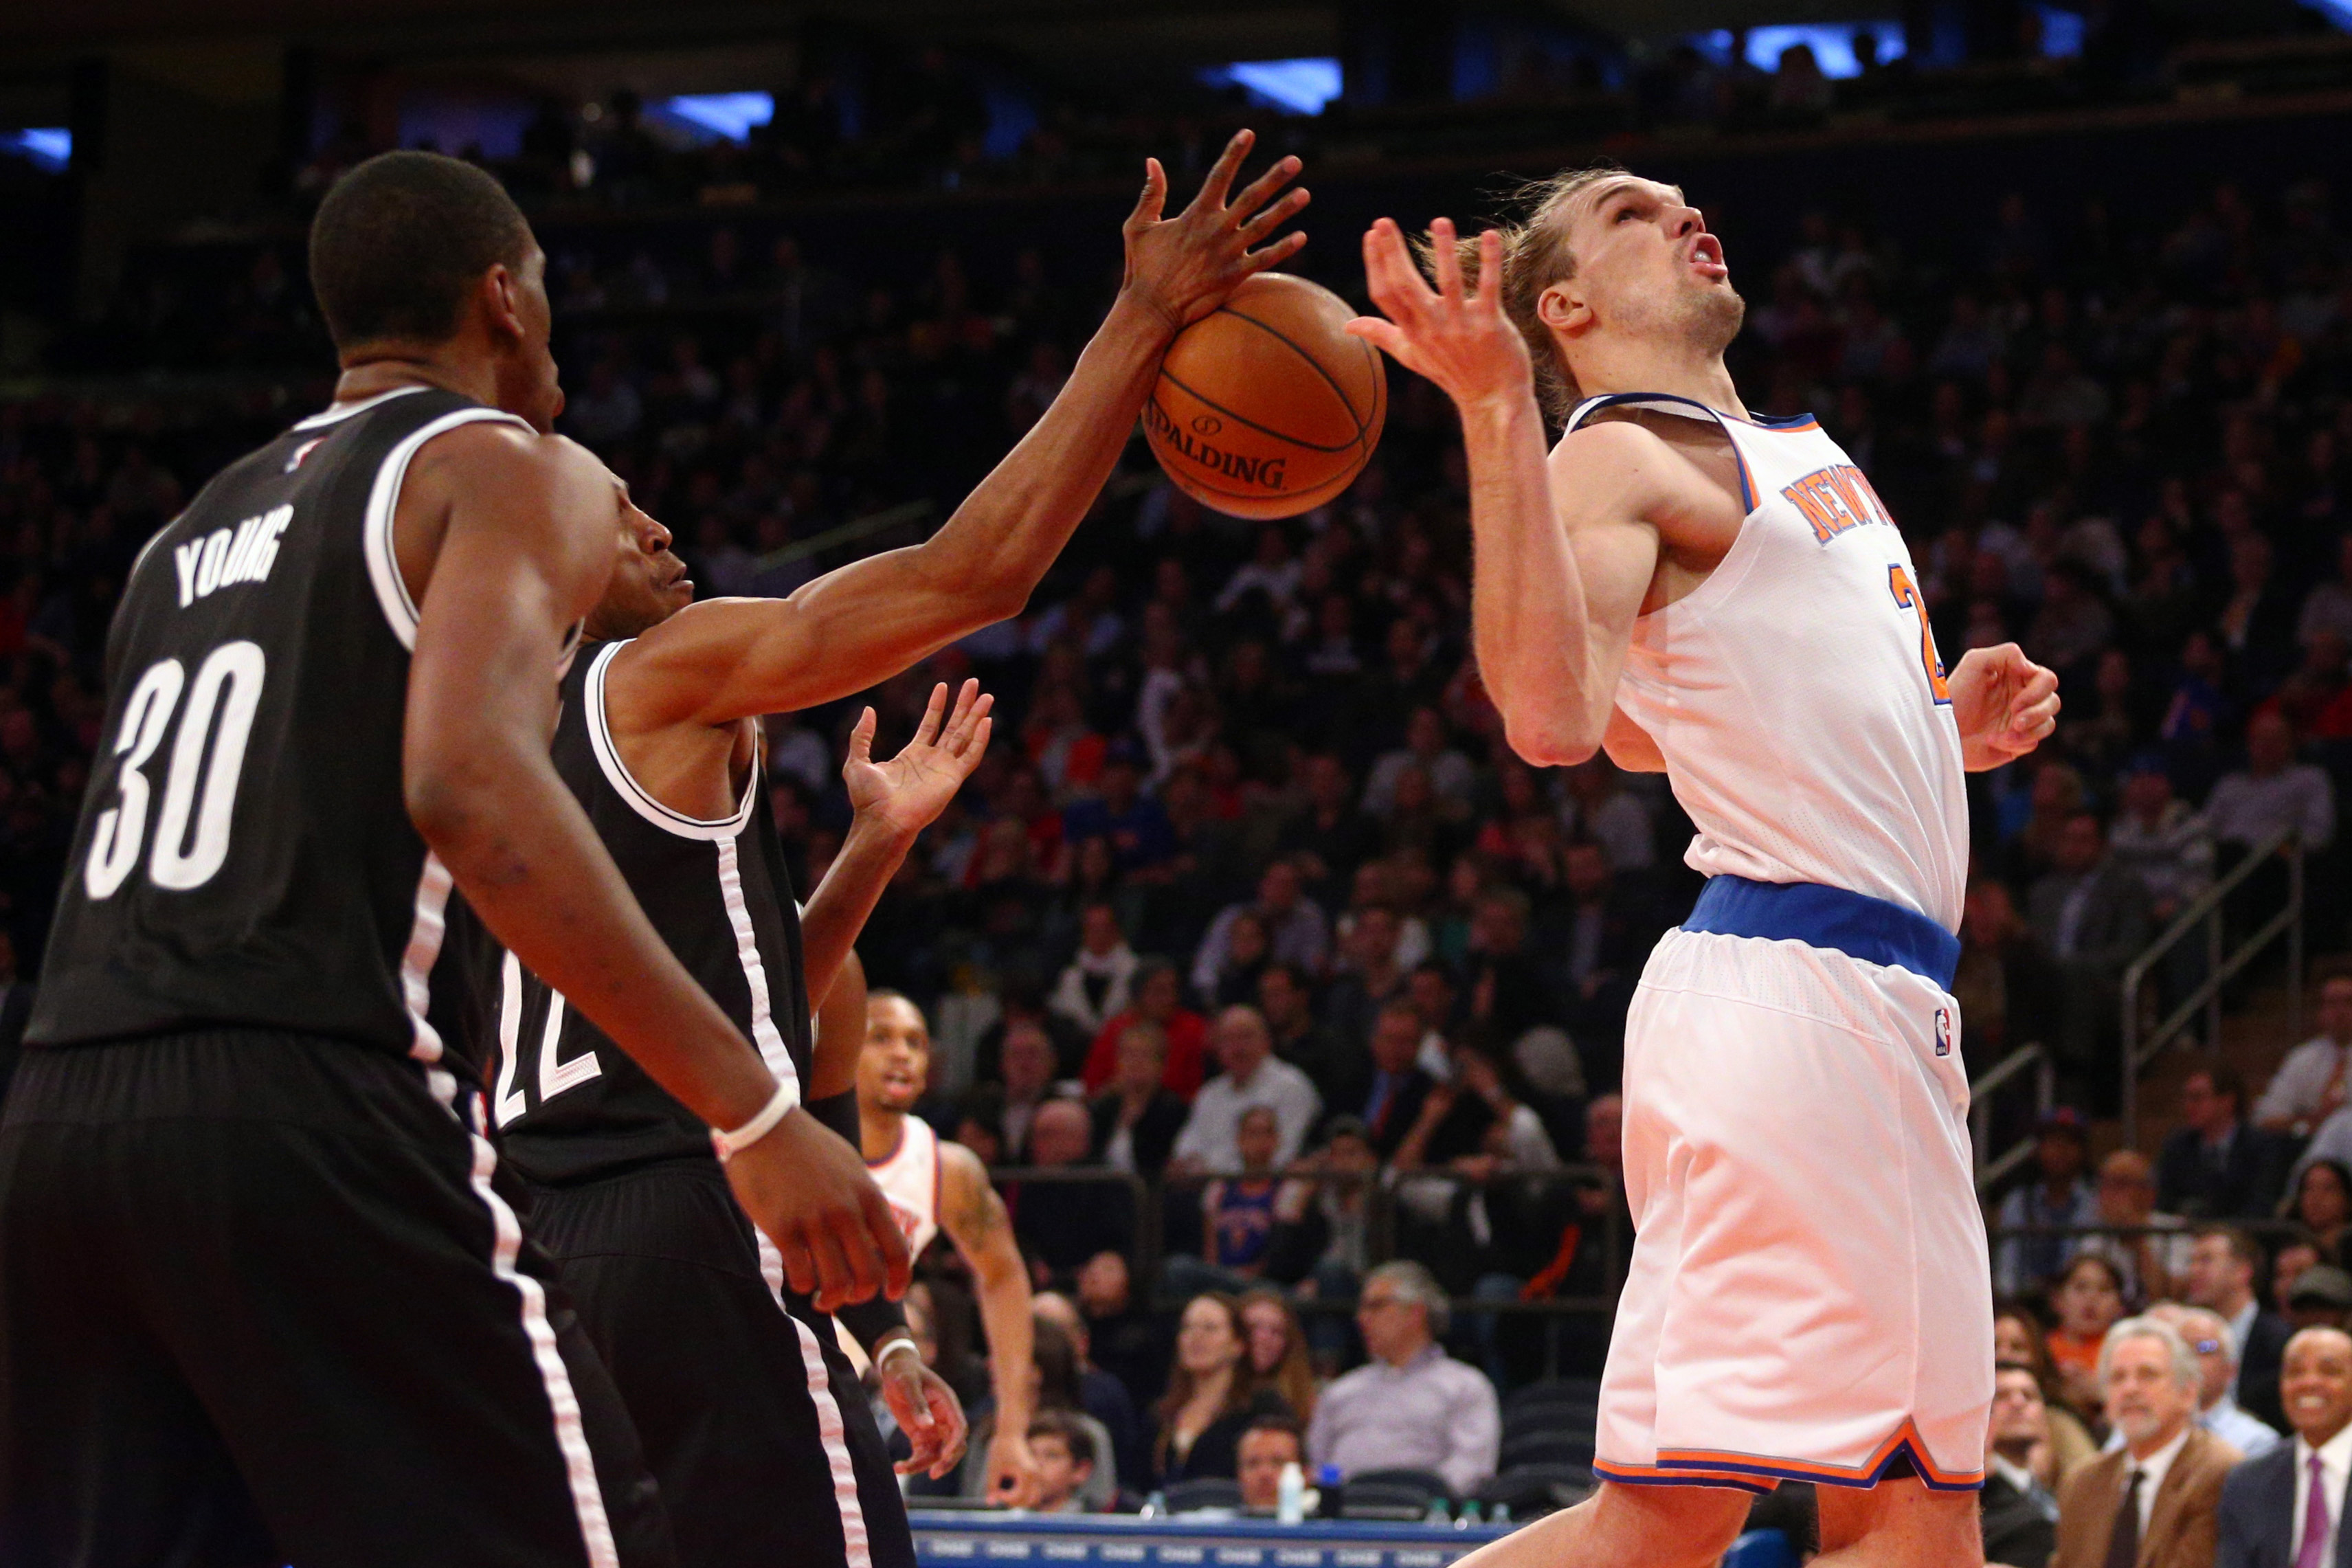 Apr 1, 2015; New York, NY, USA; New York Knicks power forward Lou Amundson (21) loses the ball as he drives against Brooklyn Nets shooting guard Markel Brown (22) and Nets small forward Thaddeus Young (30) during the third quarter at Madison Square Garden. The Nets defeated the Knicks 100-98. Mandatory Credit: Brad Penner-USA TODAY Sports